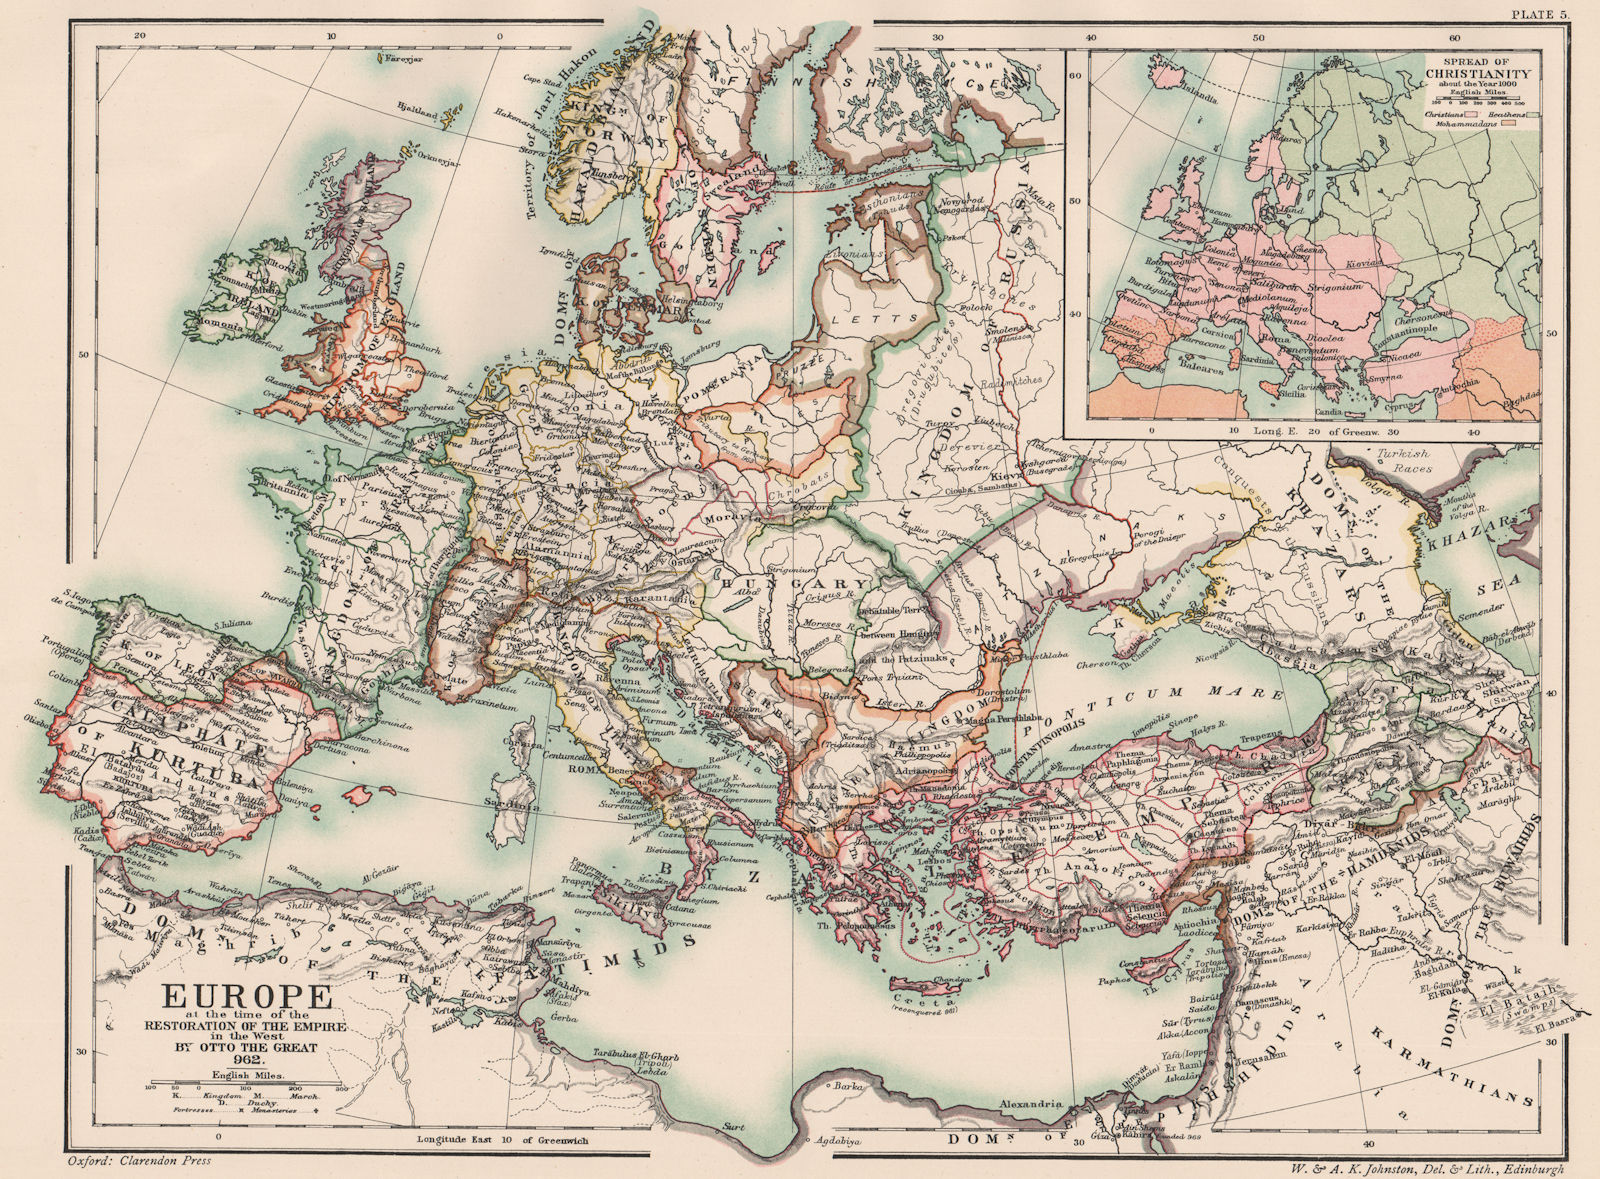 Associate Product HOLY ROMAN EMPIRE. Europe. Otto the Great 962. Spread of Christianity 1902 map